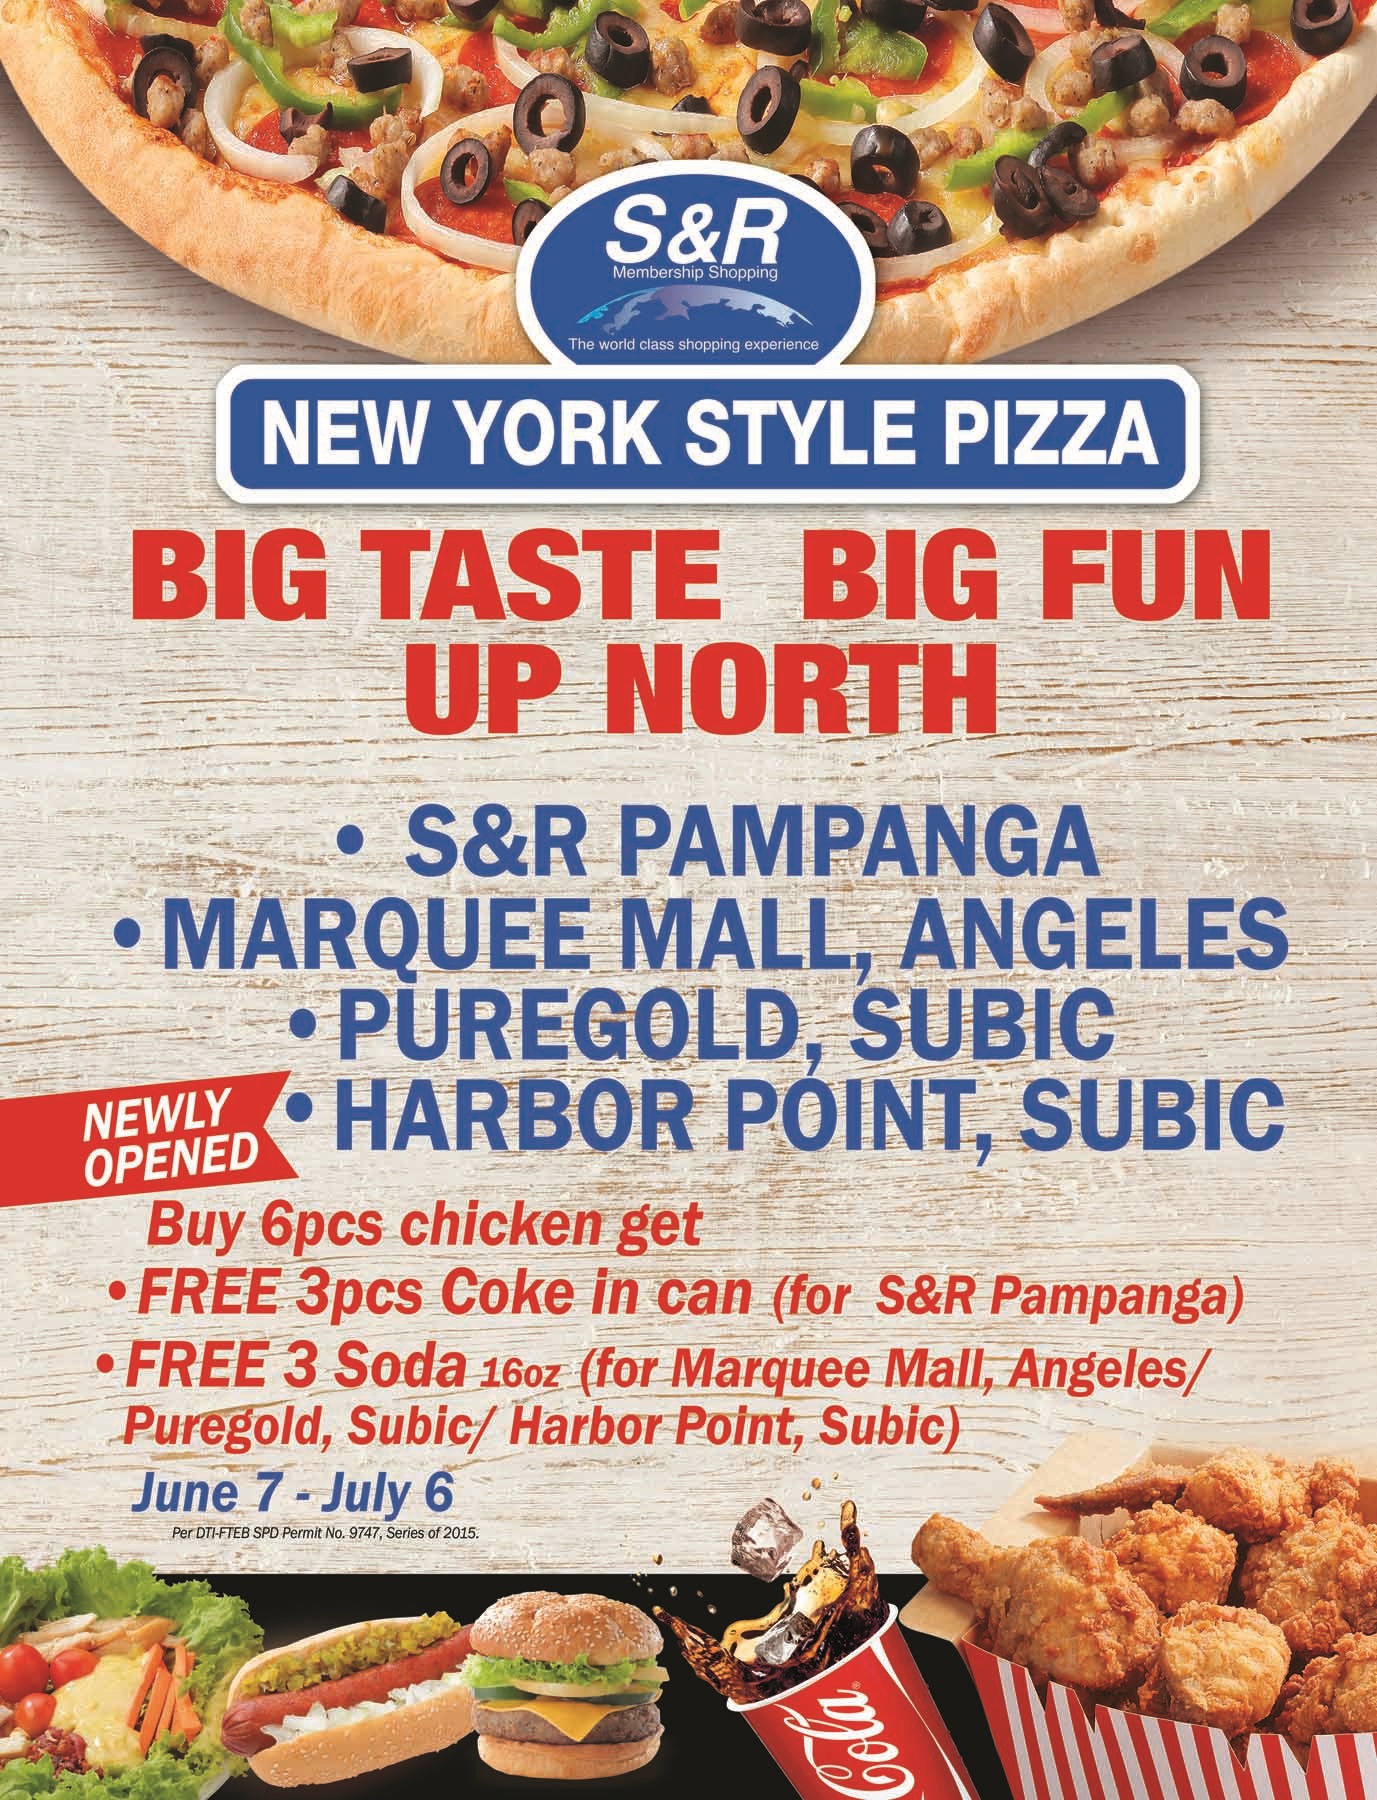 Free Soft Drinks For 3 At S R New York Style Pizza Karen Mnl